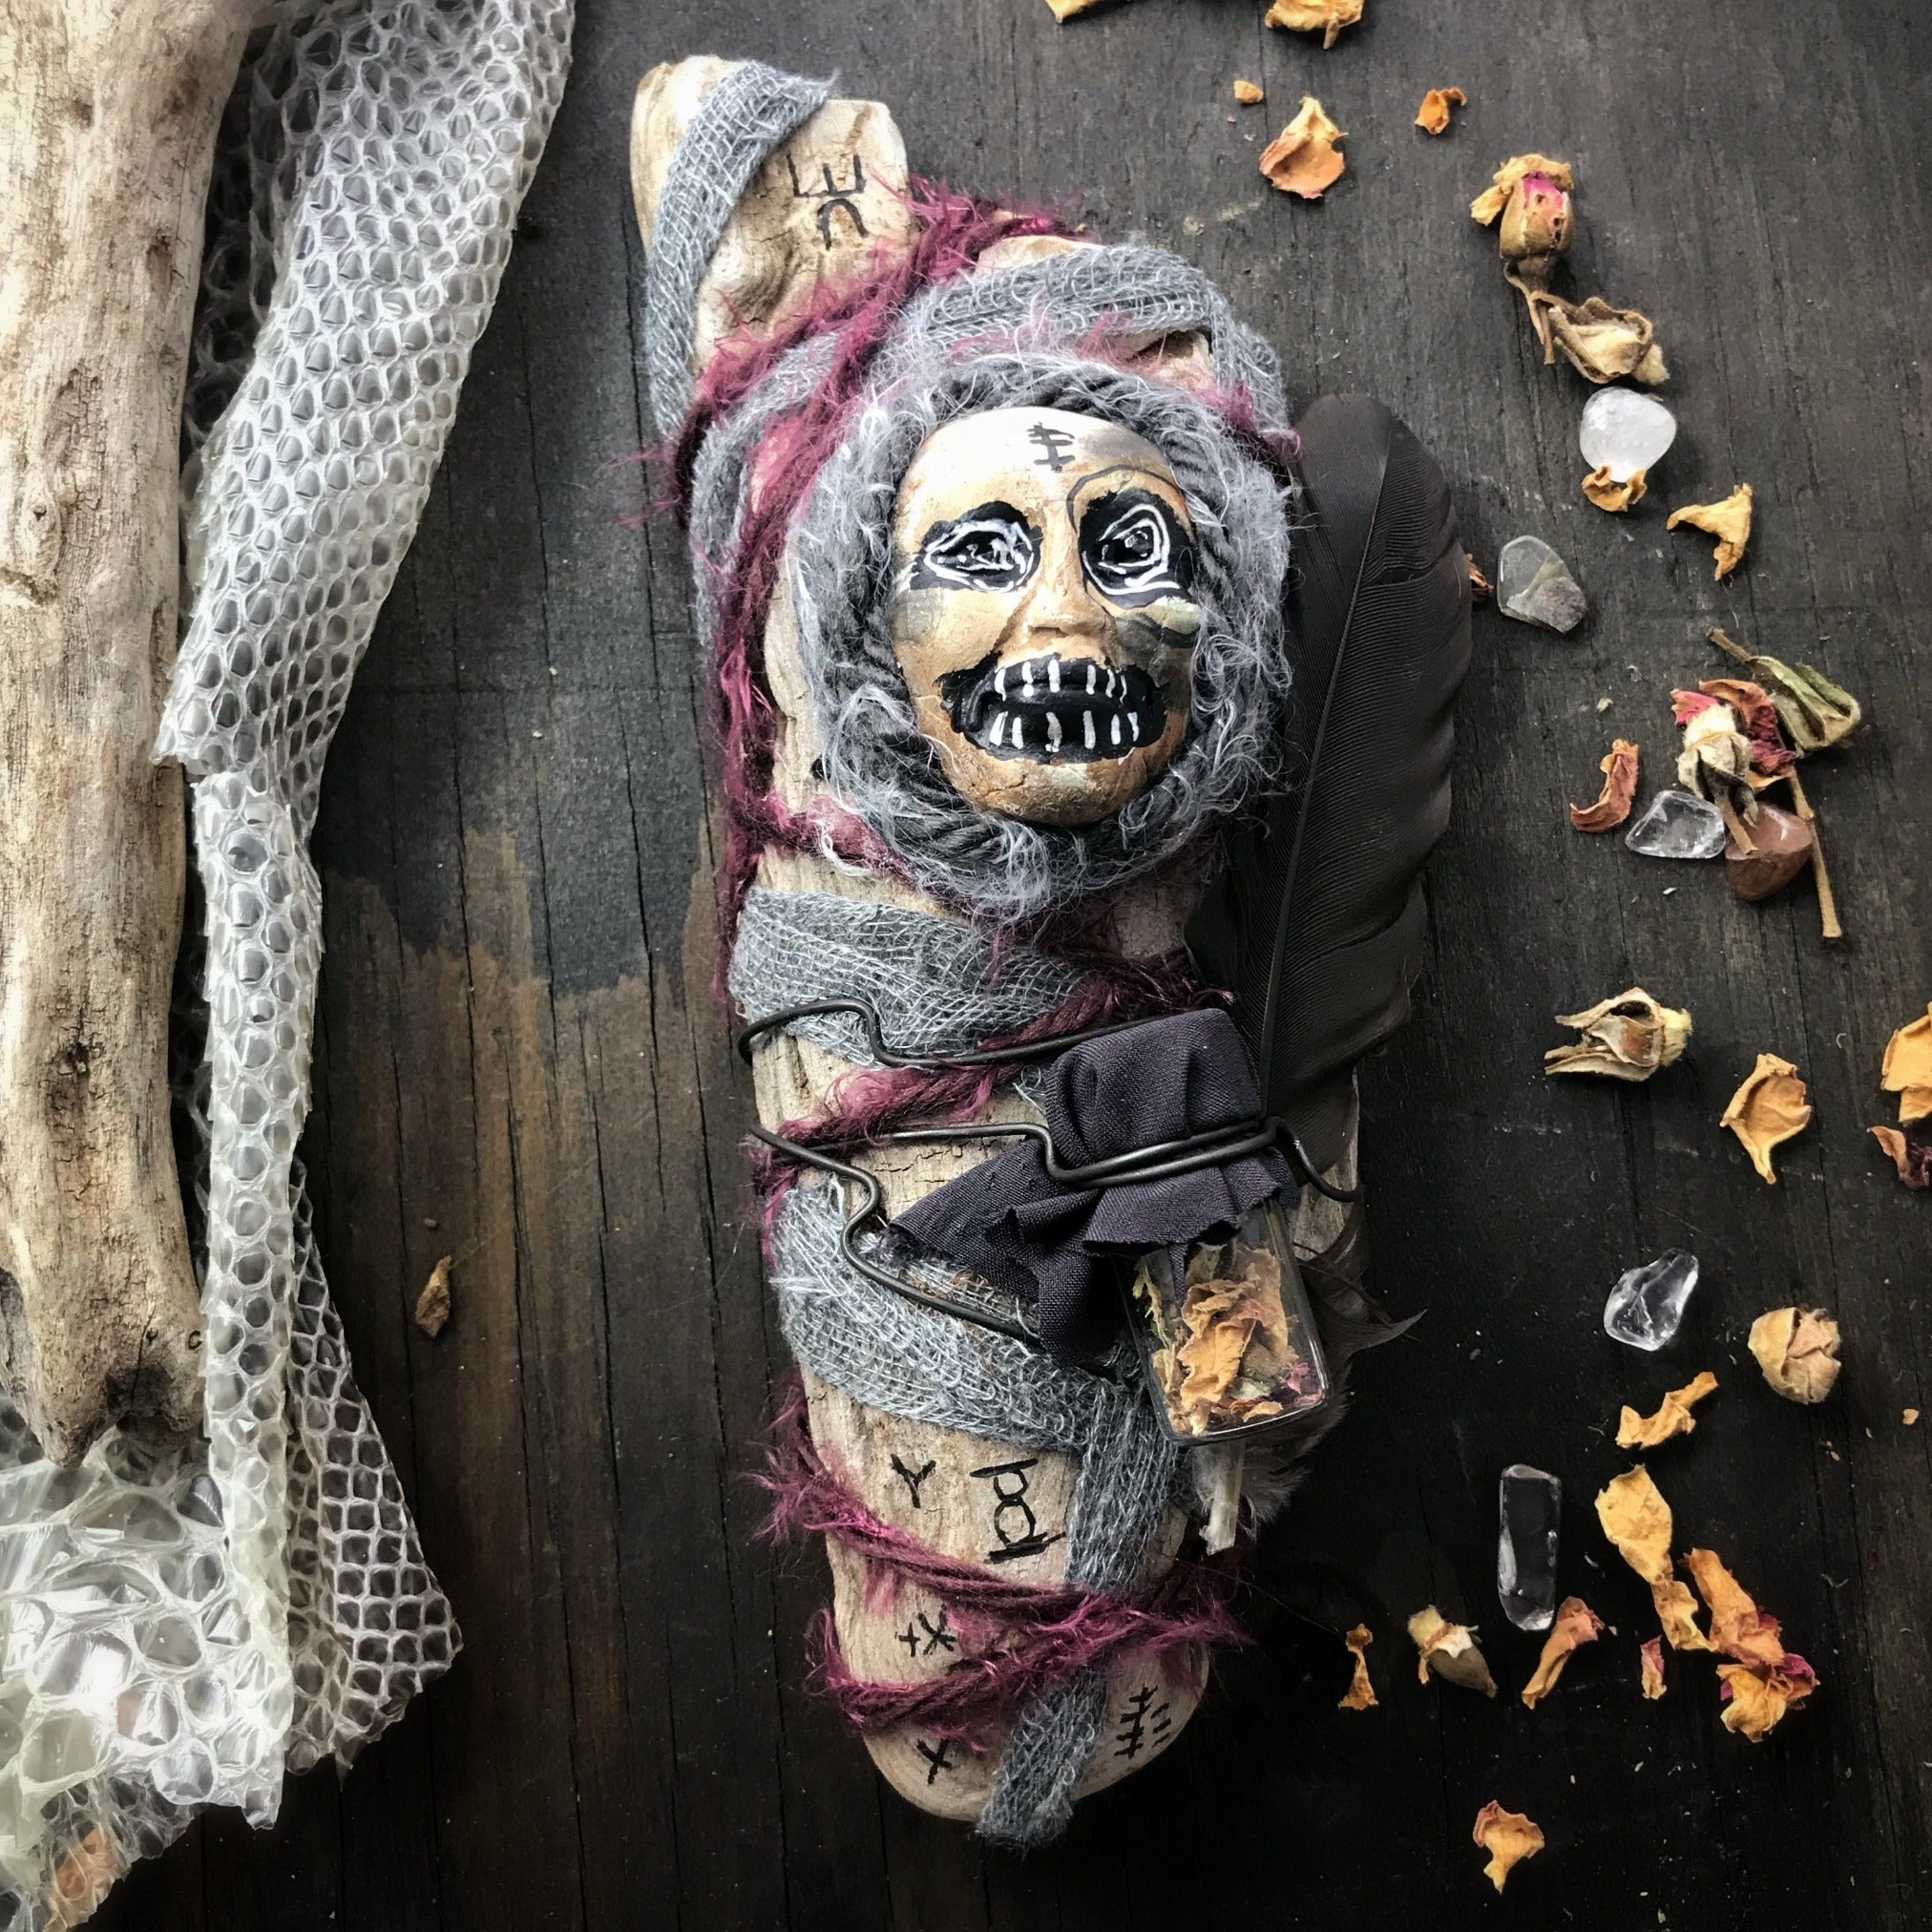 Wise Woman Spirit Doll with Rose Petals, Poke Root, Snake Skin and Ghost Quartz for Self Love, Transformation and Freedom